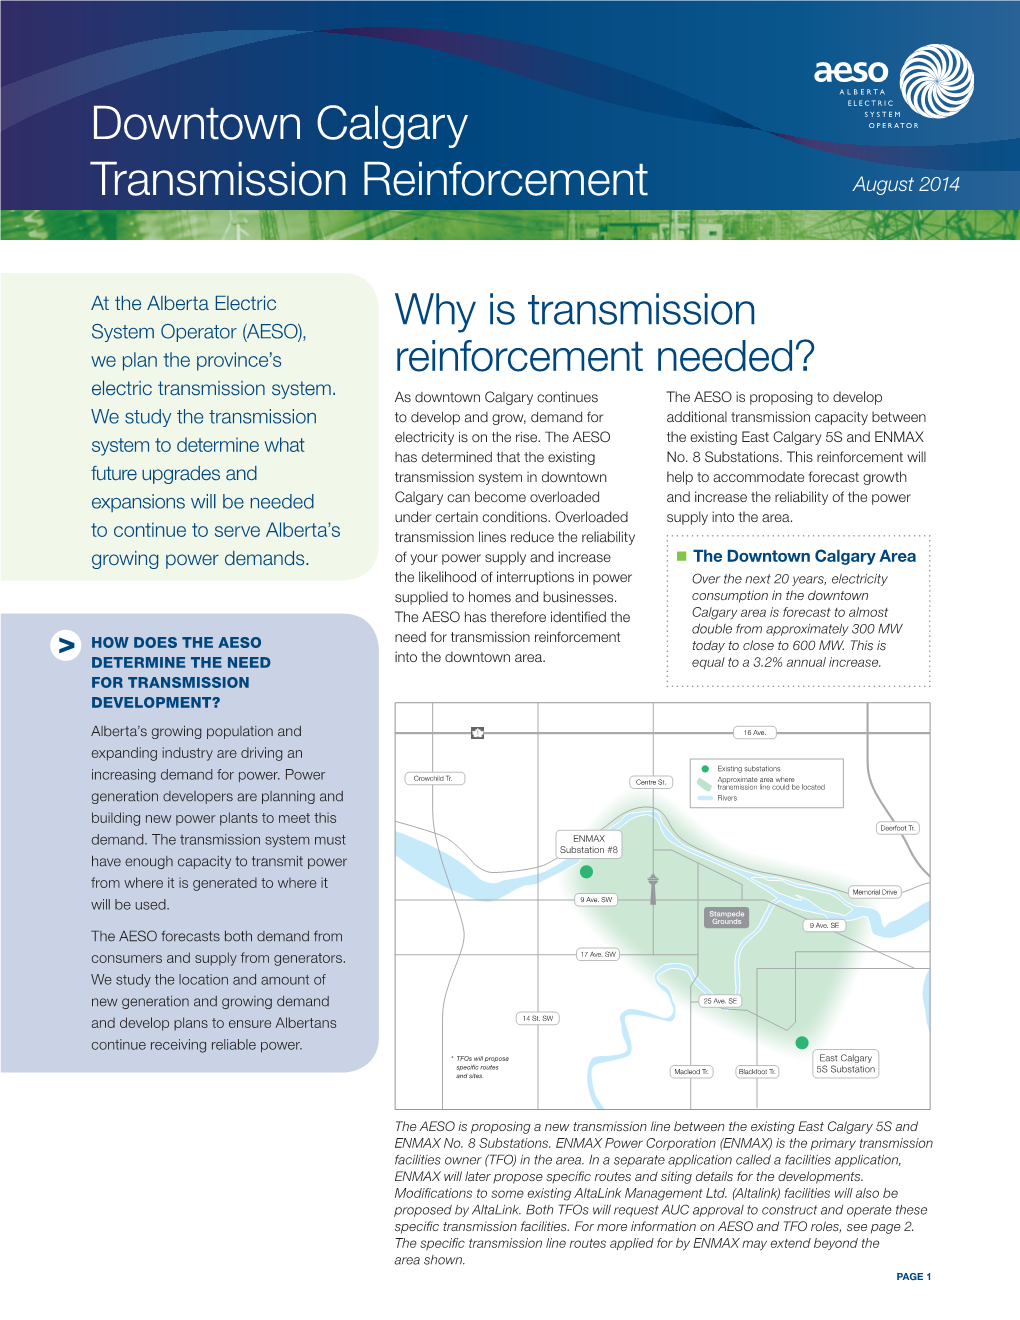 Downtown Calgary Transmission Reinforcement Newsletter